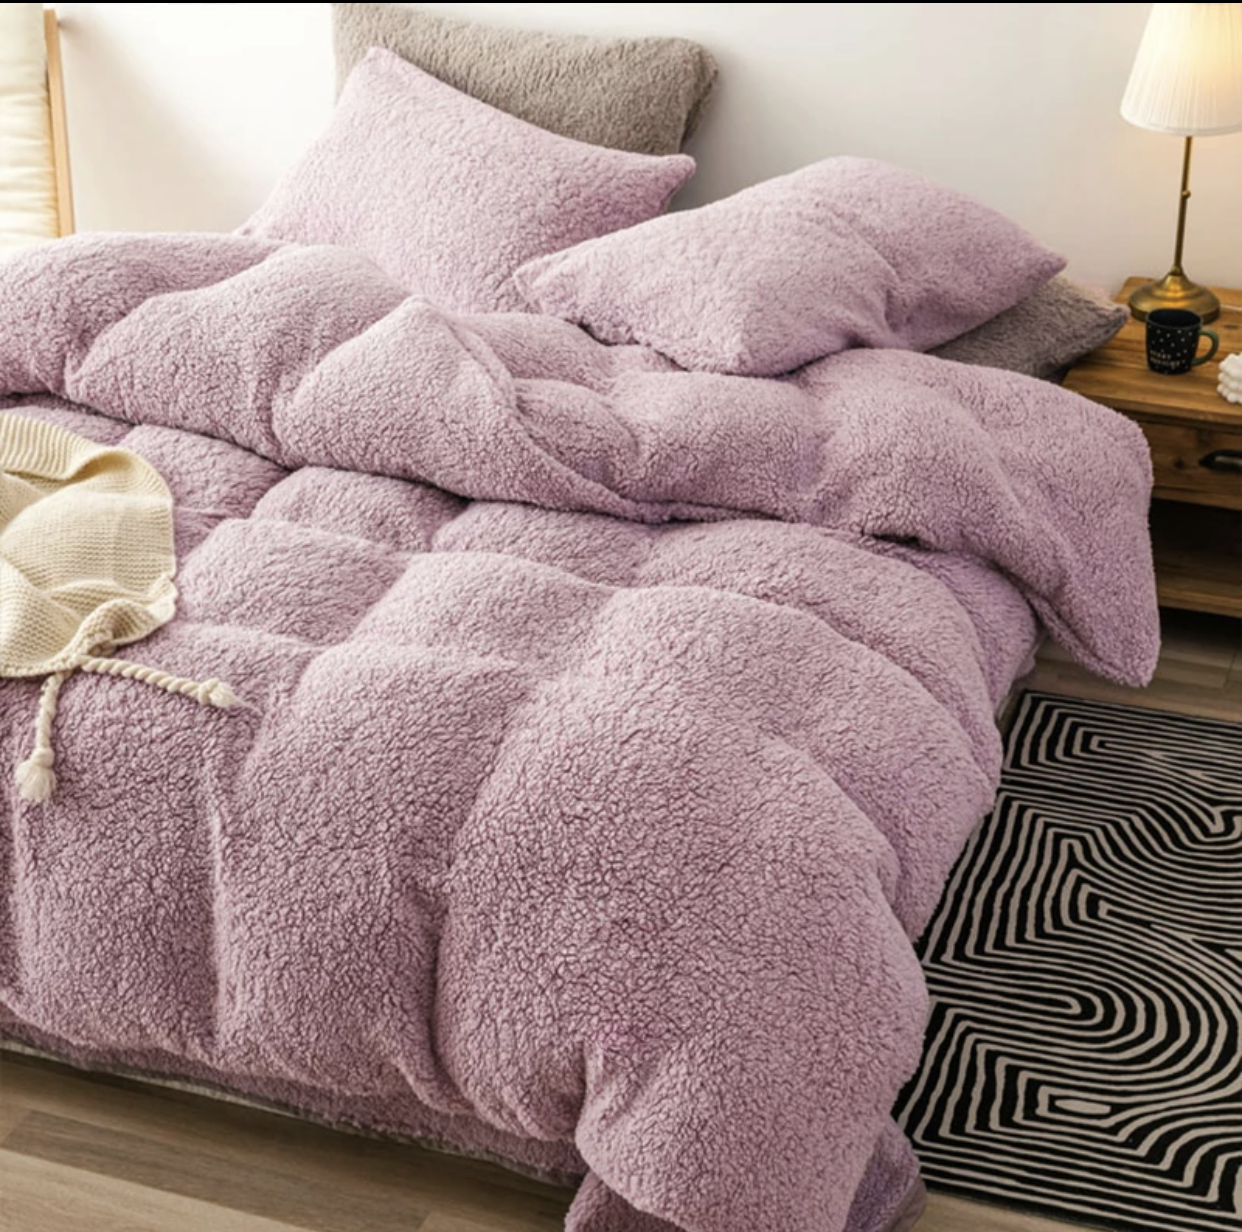 Teddy Bear Fleece Fitted Sheet OR Duvet Cover Set Sherpa Thermal Warm Bedding Pink